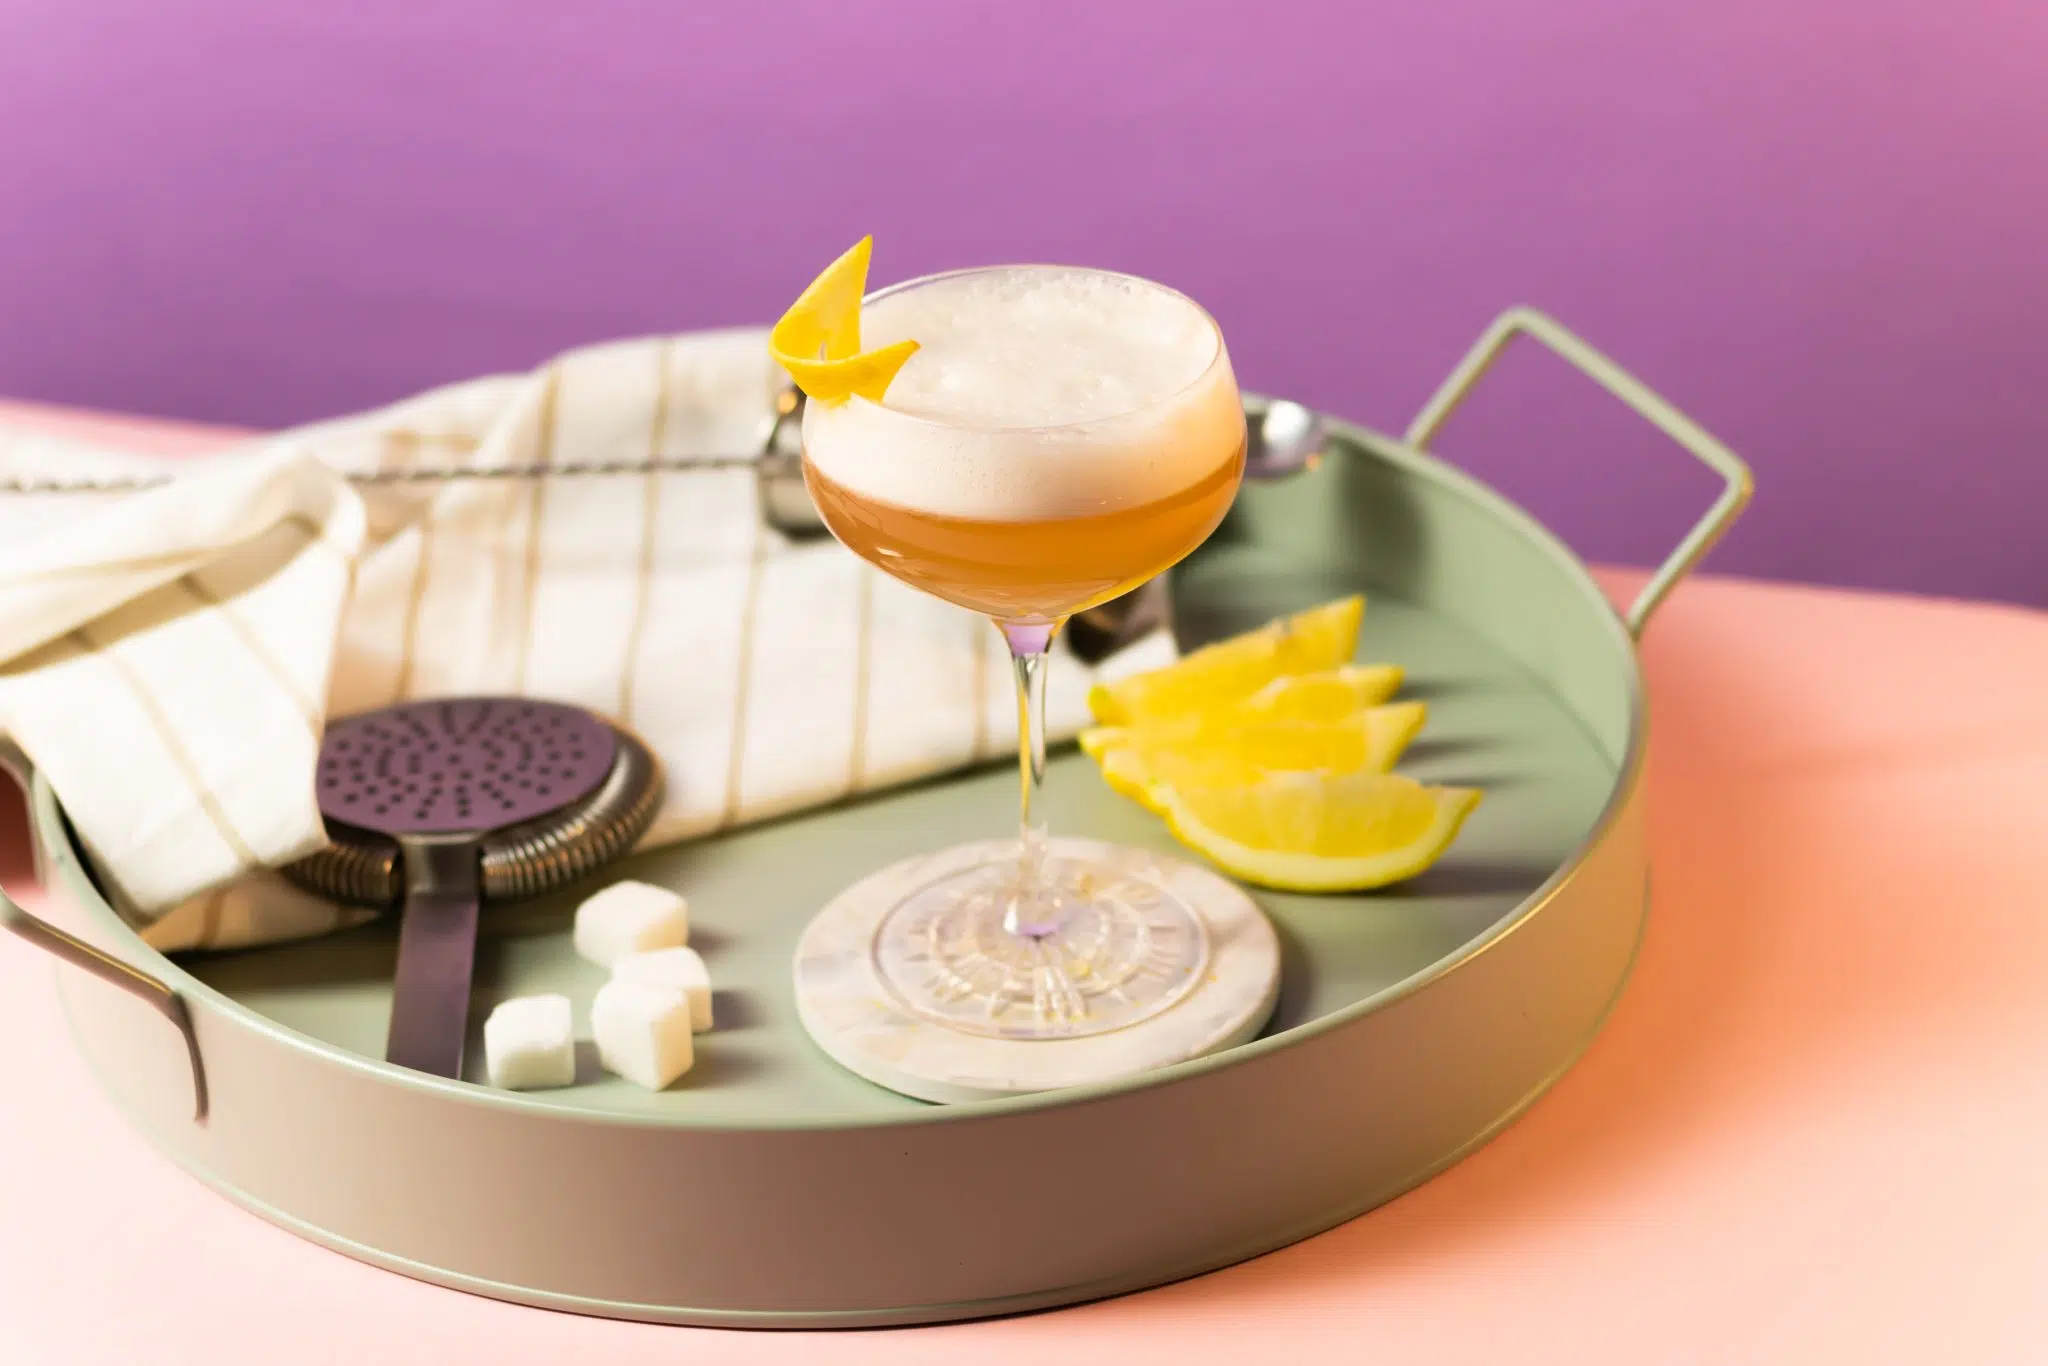 A side shot of a Boston Sour cocktail in a cocktail glass on a white coaster placed on a turquoise tray surrounded by a a cocktail strainer, four lemon wedges, four sugar cubes, a bar spoon, and a white cloth